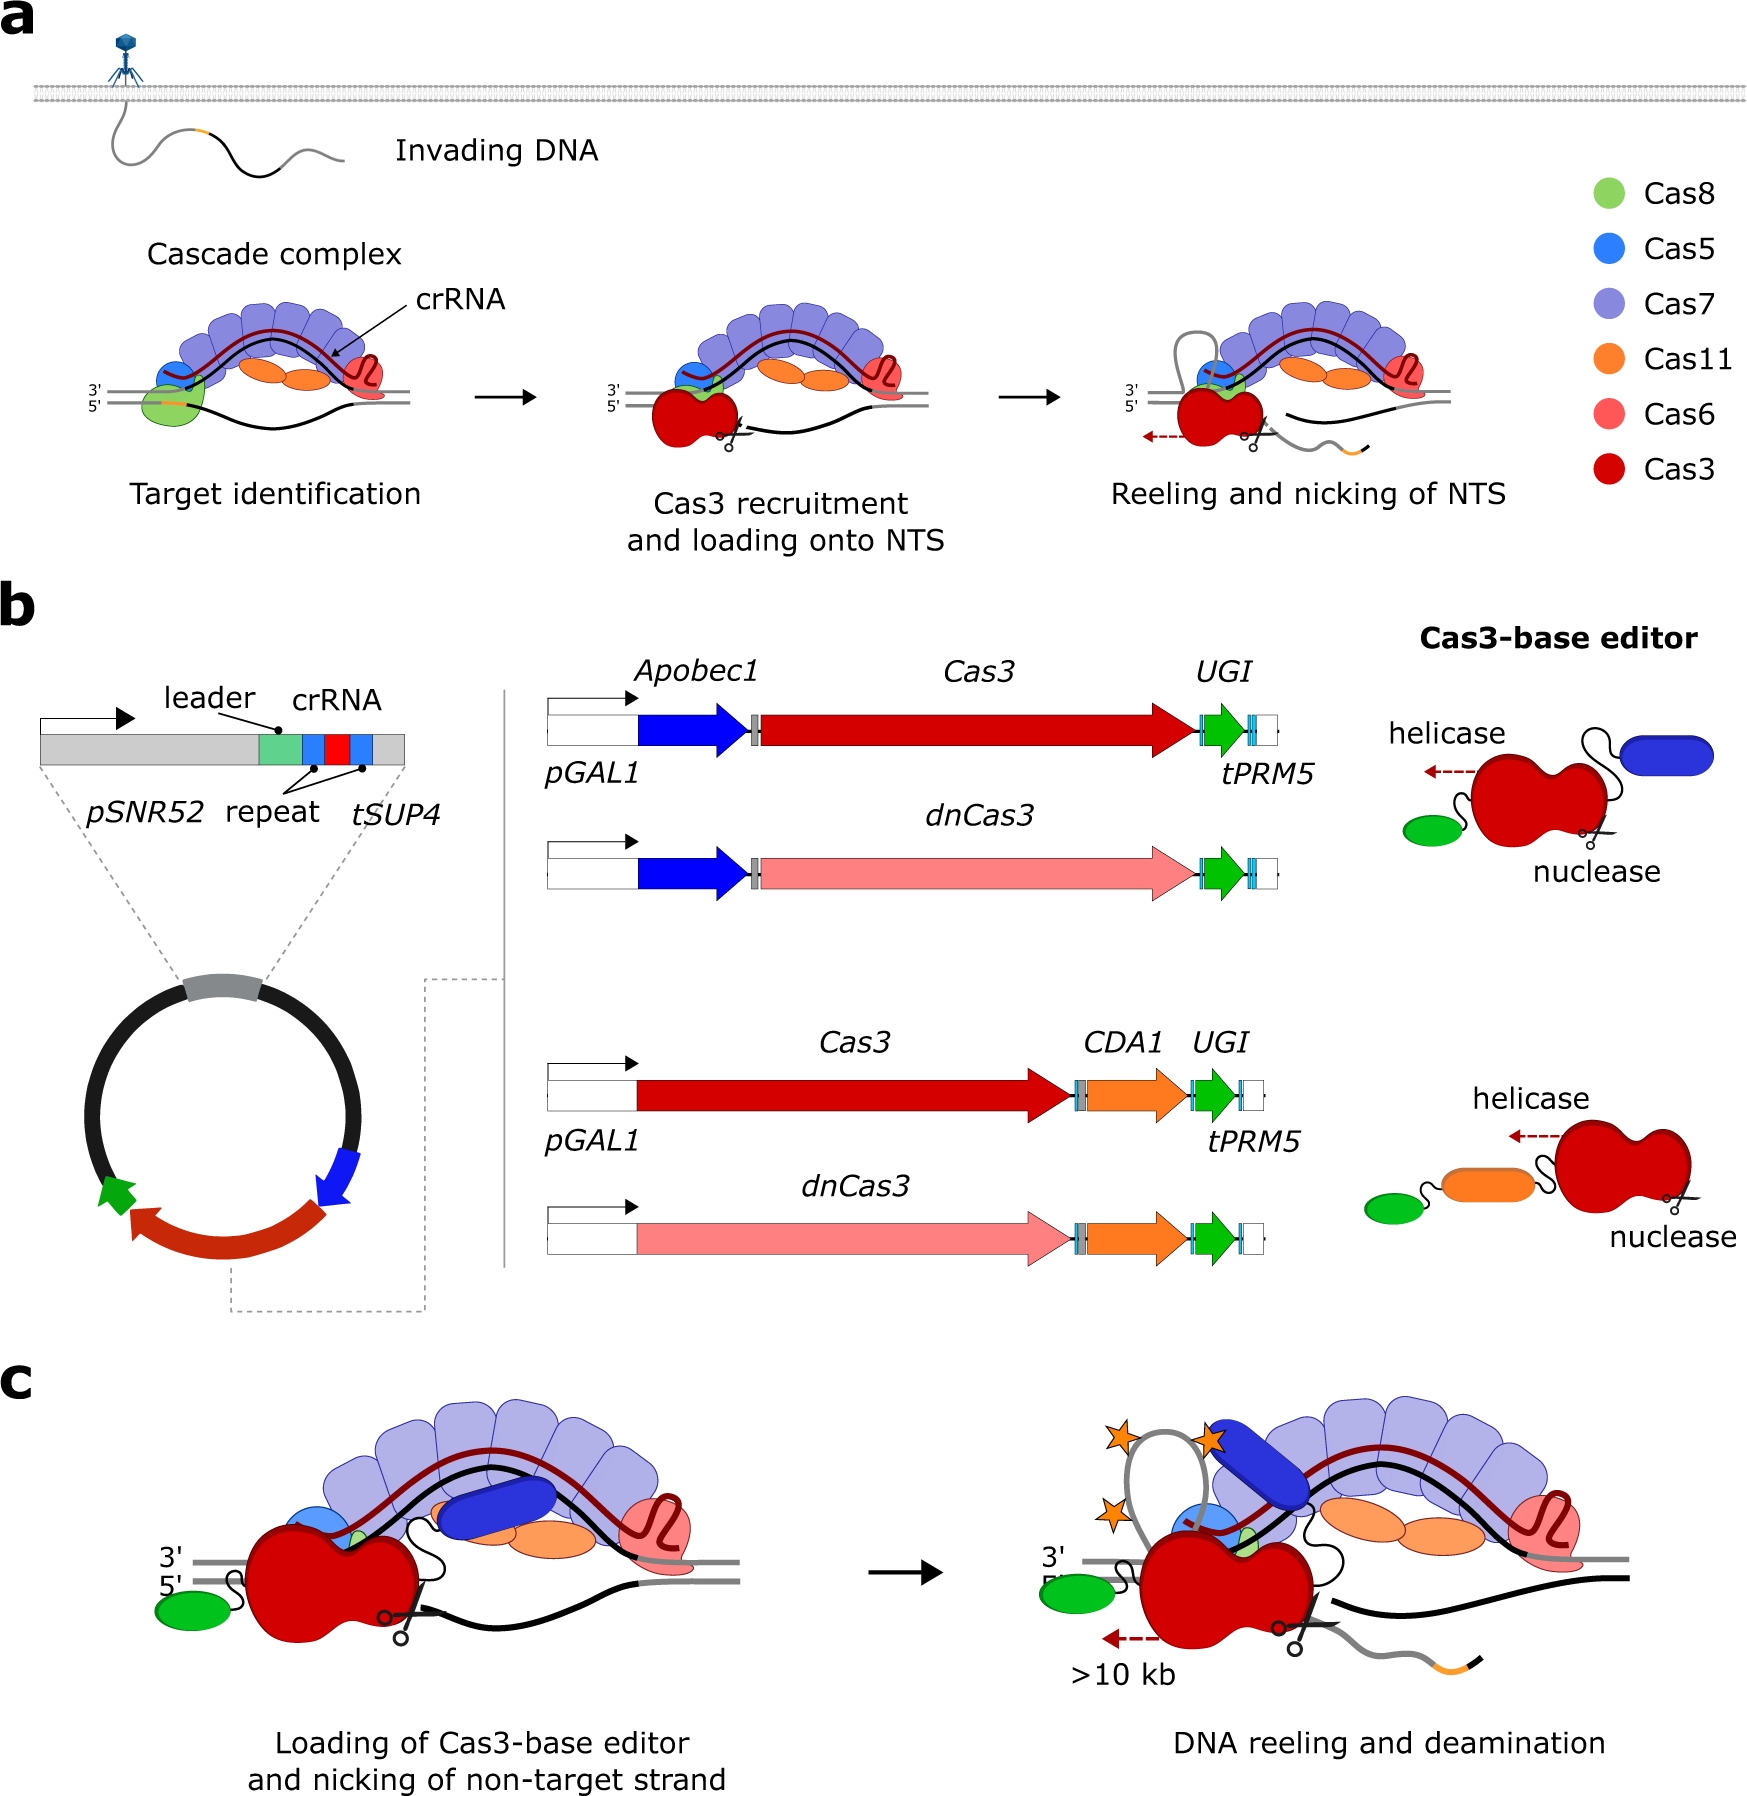 A Cas3-base editing tool for targetable in vivo mutagenesis